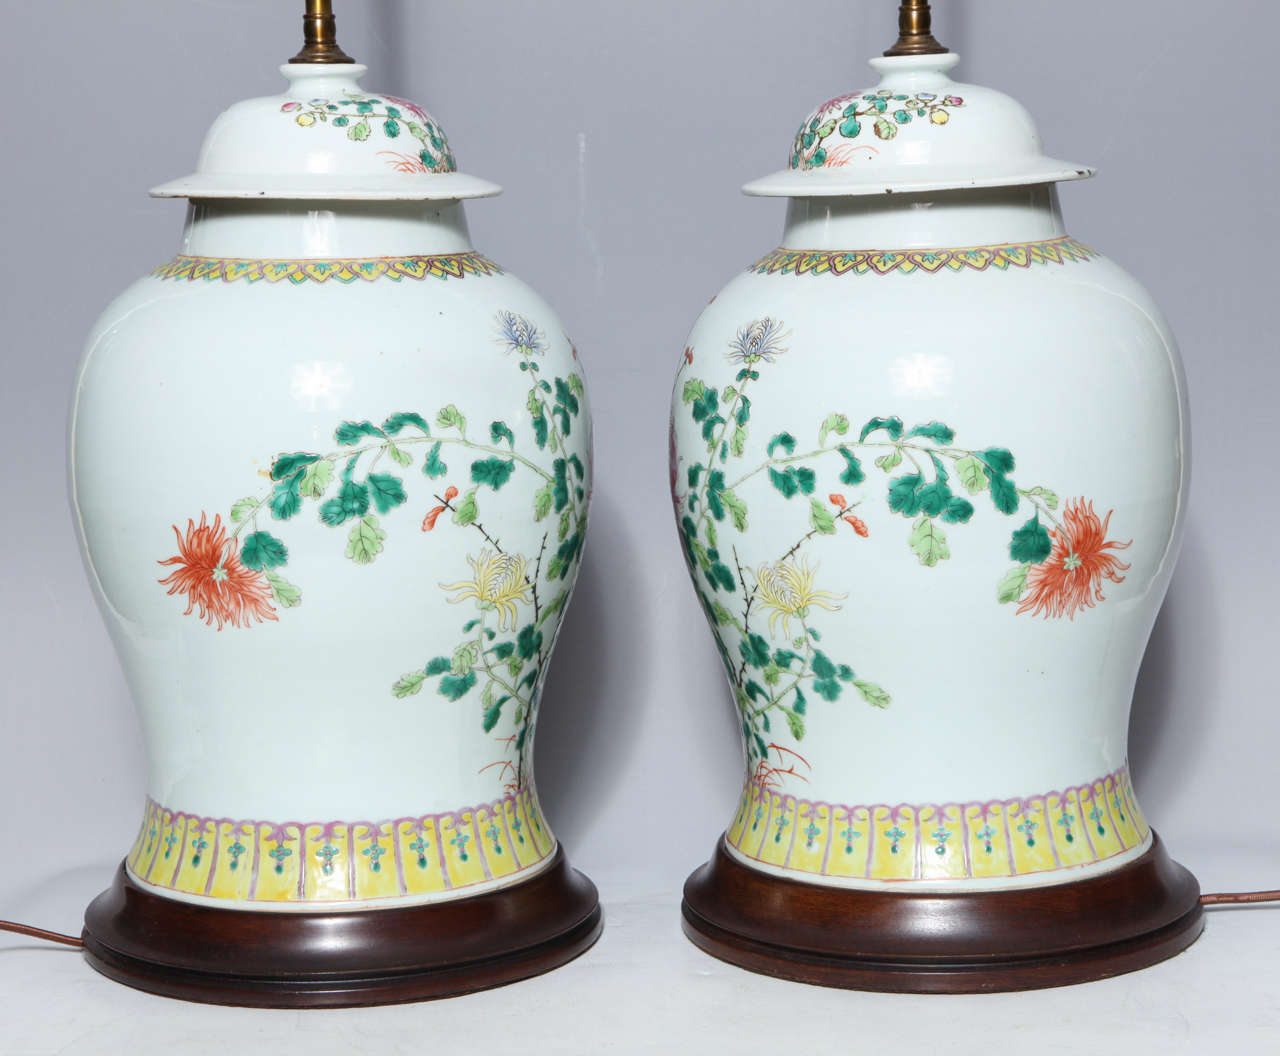 Pair of 19th Century Chinese Porcelain Ginger Jars Converted into Table Lamps For Sale 5